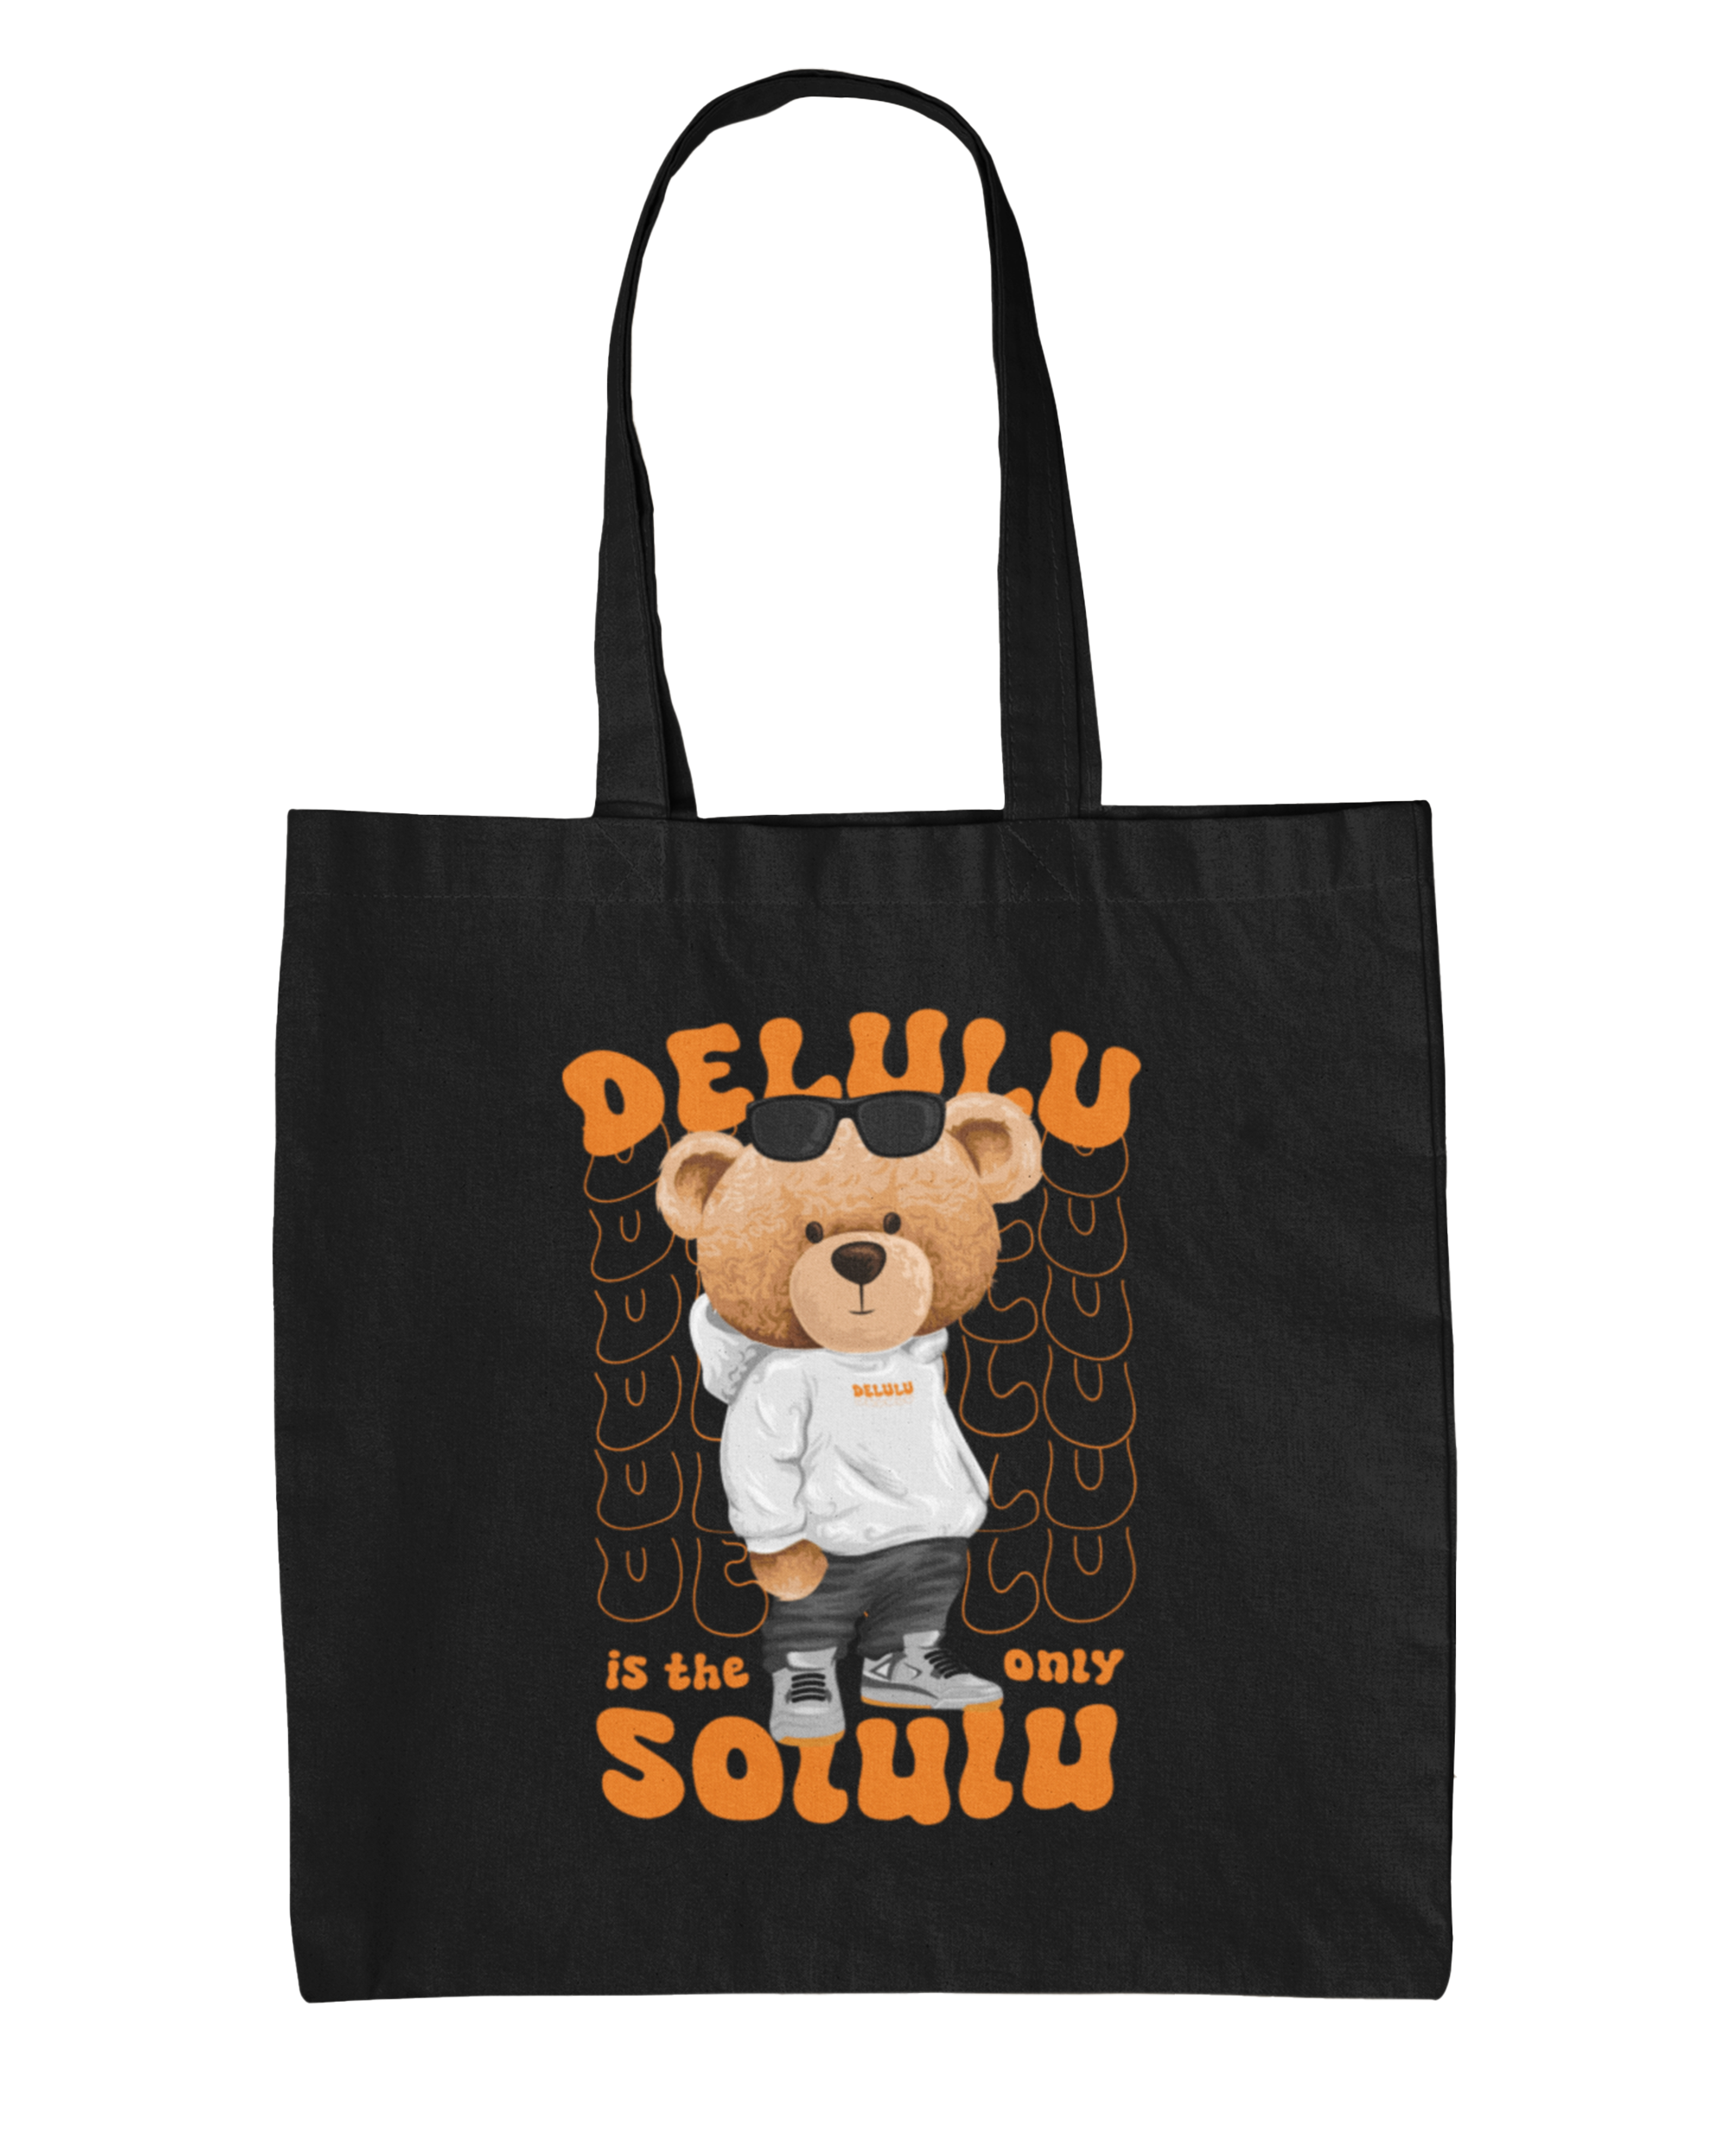 Delulu Is The Only Solulu Tote Bag